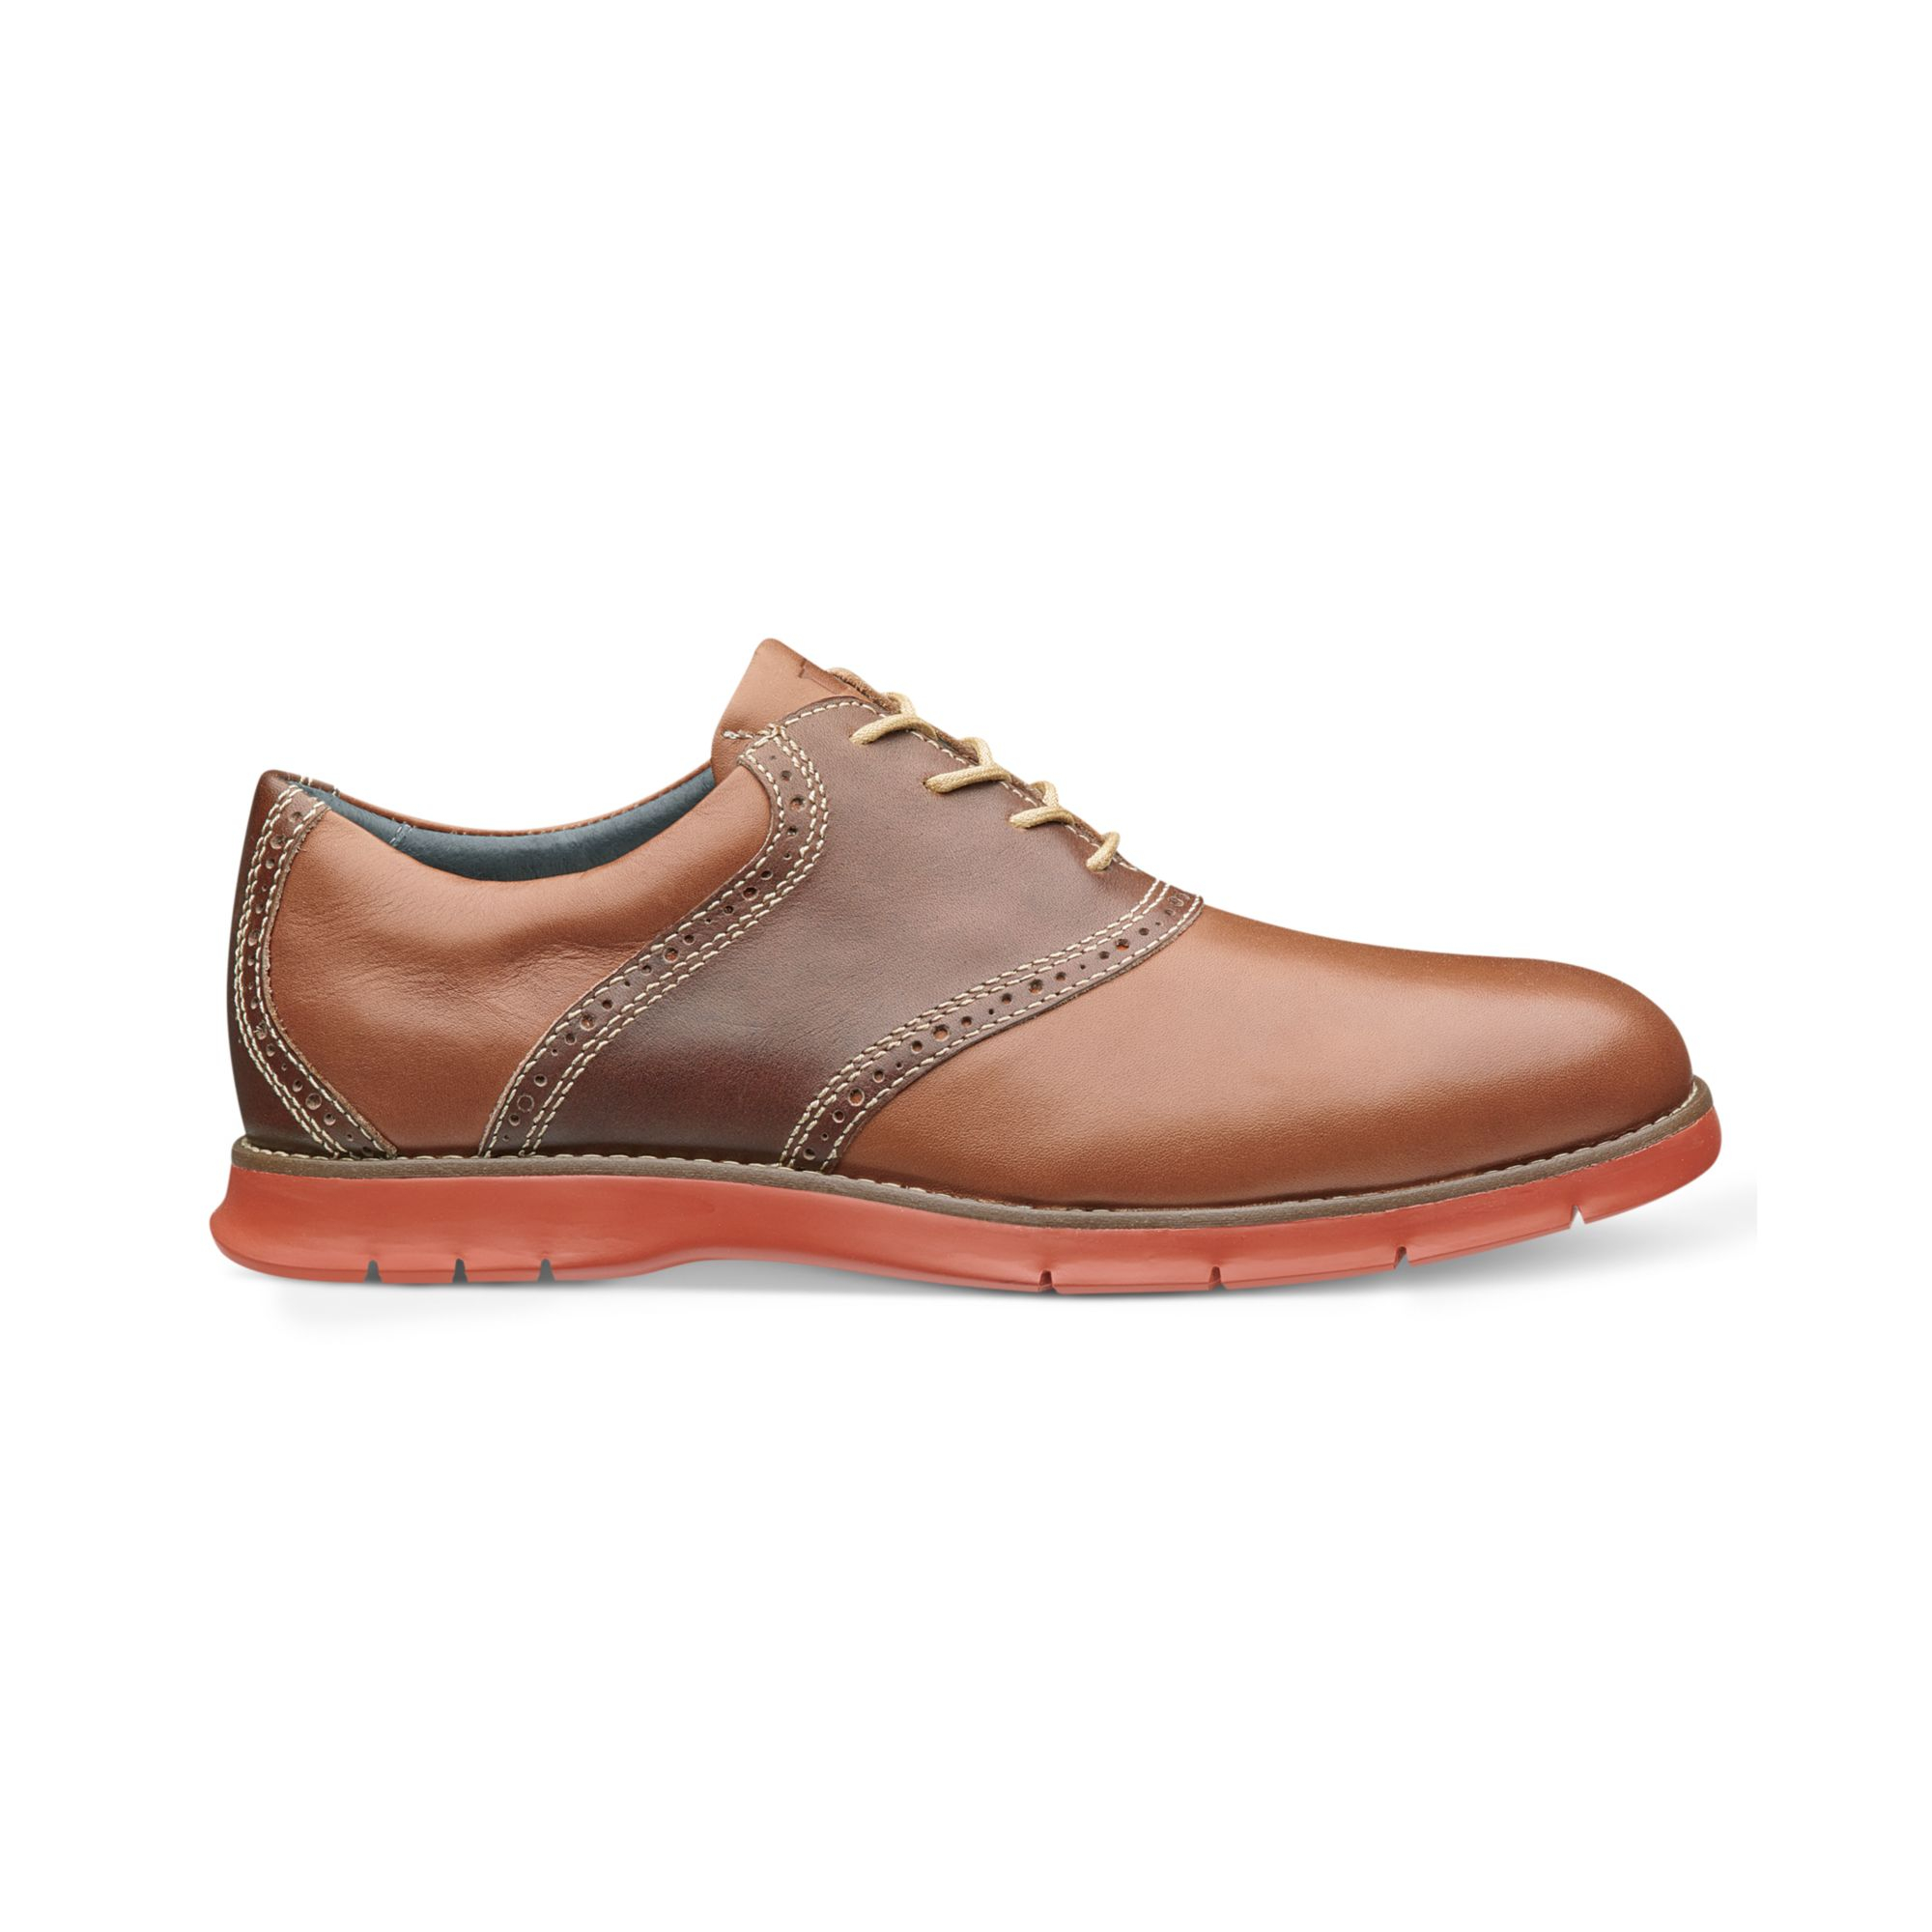 Florsheim Flites Saddle Laceup Shoes with Comfor technology in Brown ...